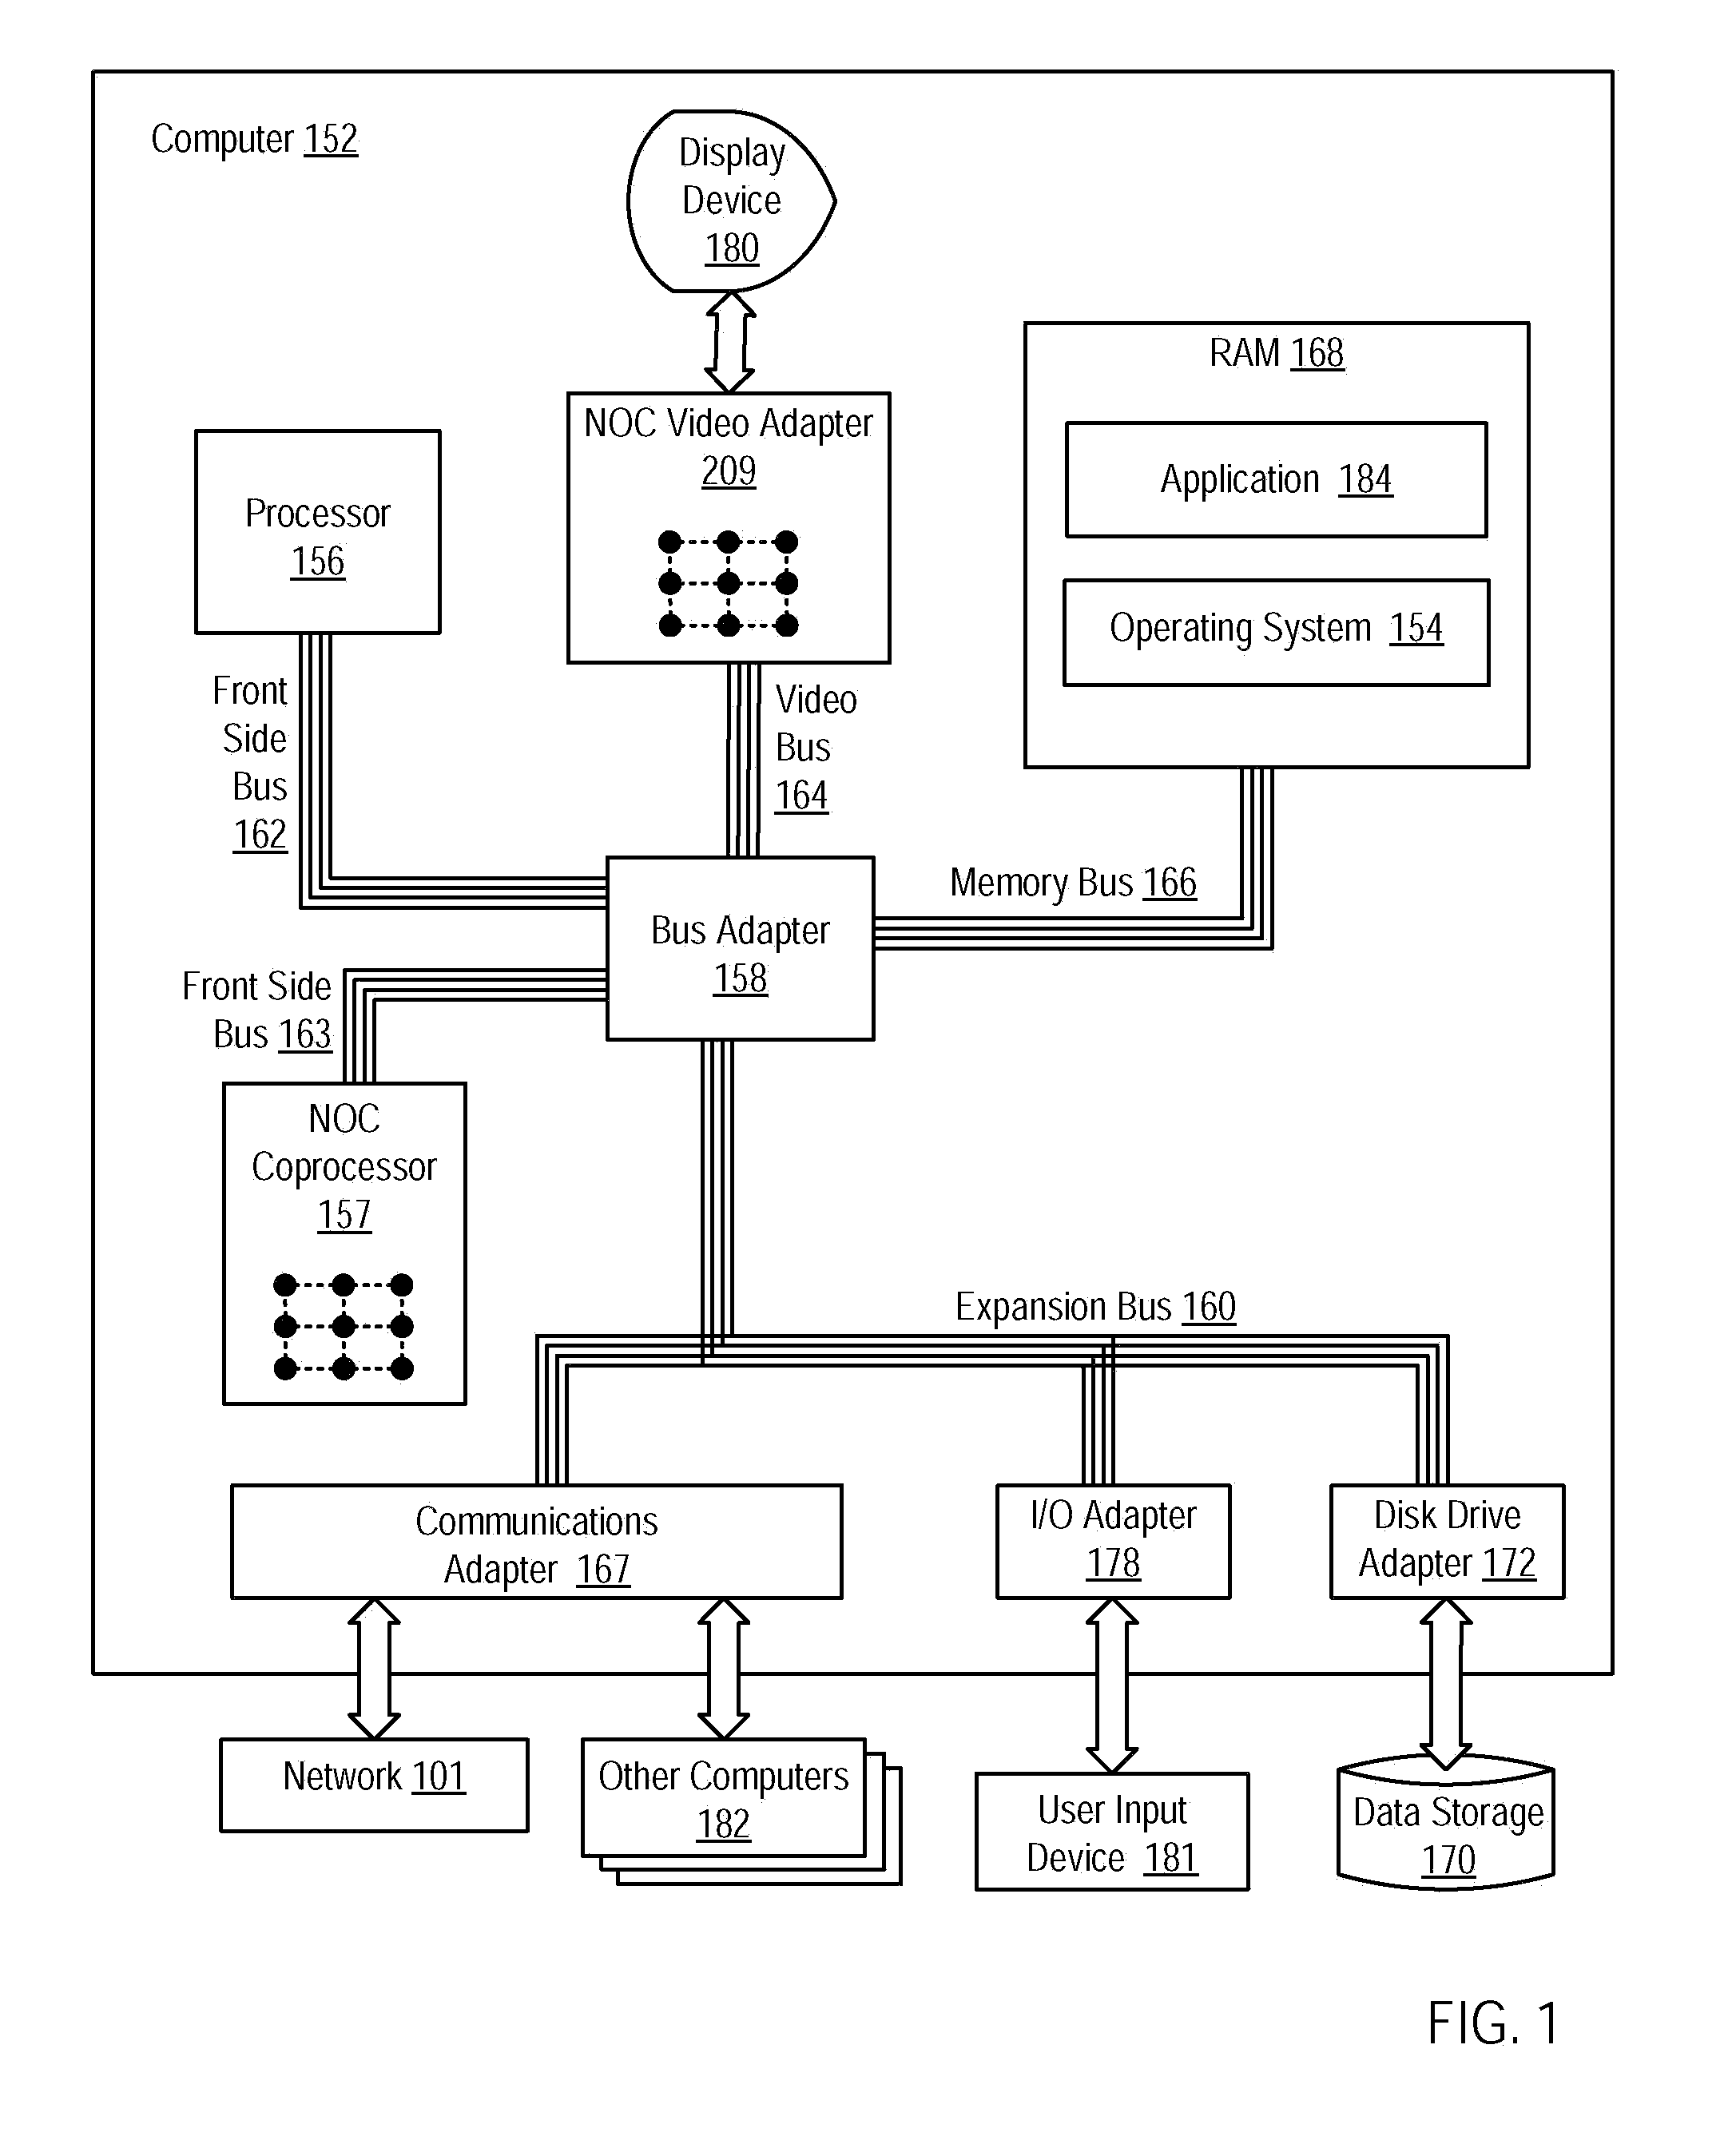 Network On Chip that Maintains Cache Coherency with Invalidate Commands